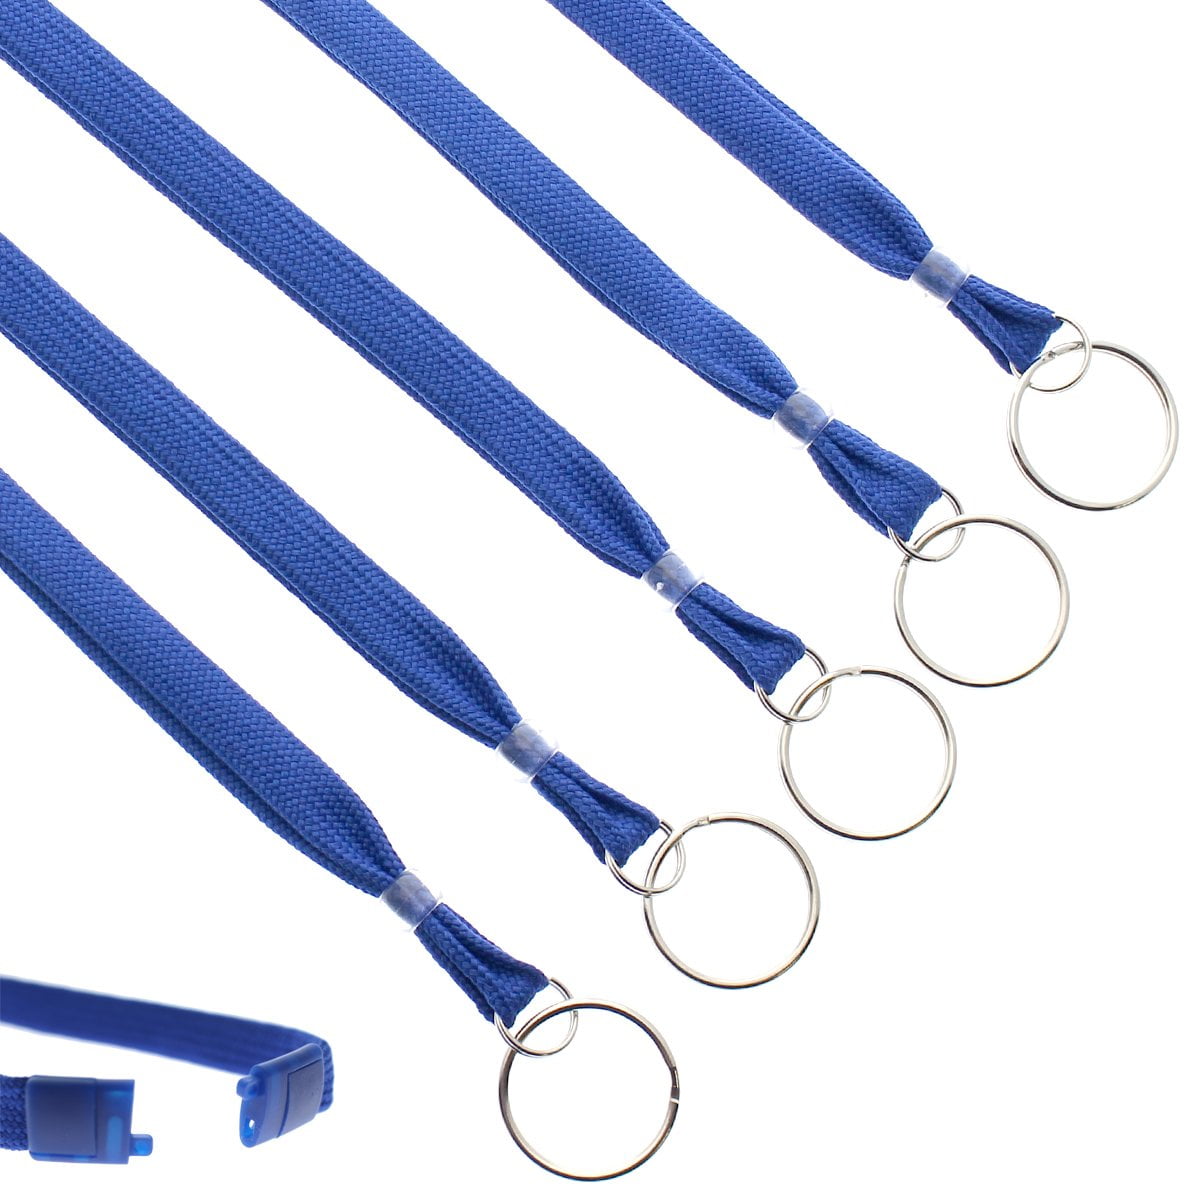 BLUE LANYARD Key chain Neck strap ID Holder Detachable clasp SOLID royal color 